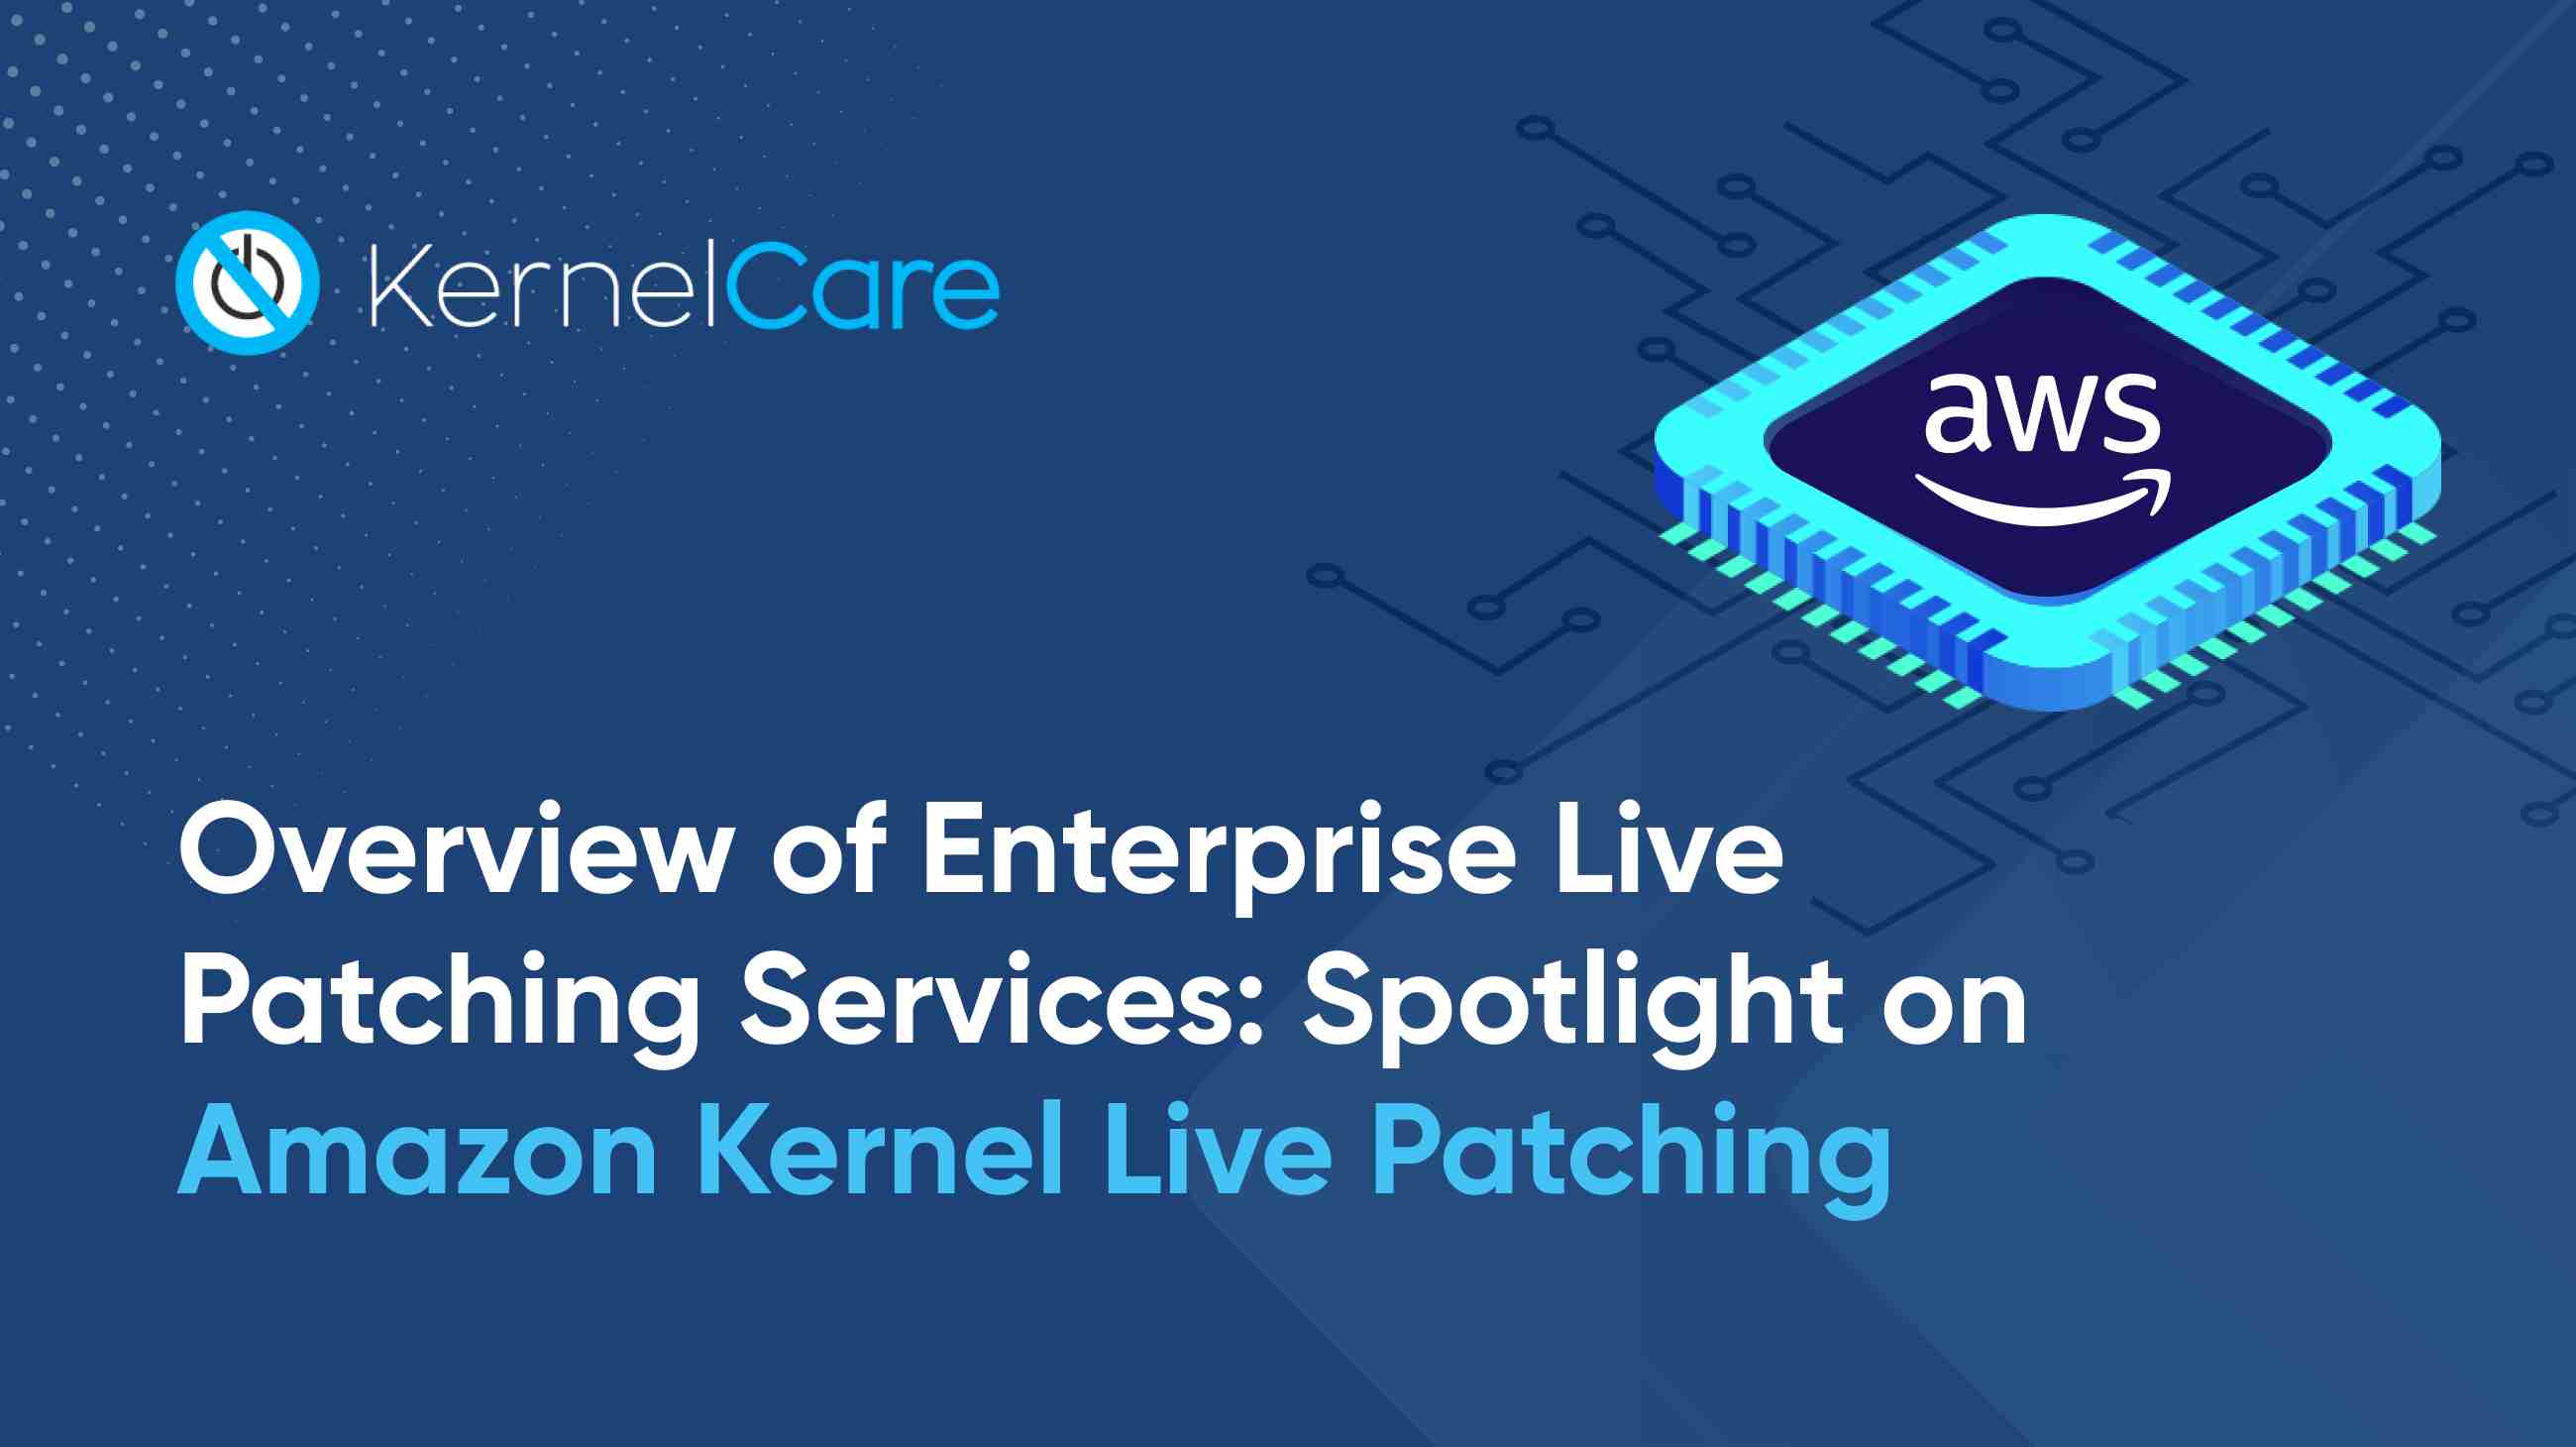 Amazon Kernel Live Patching